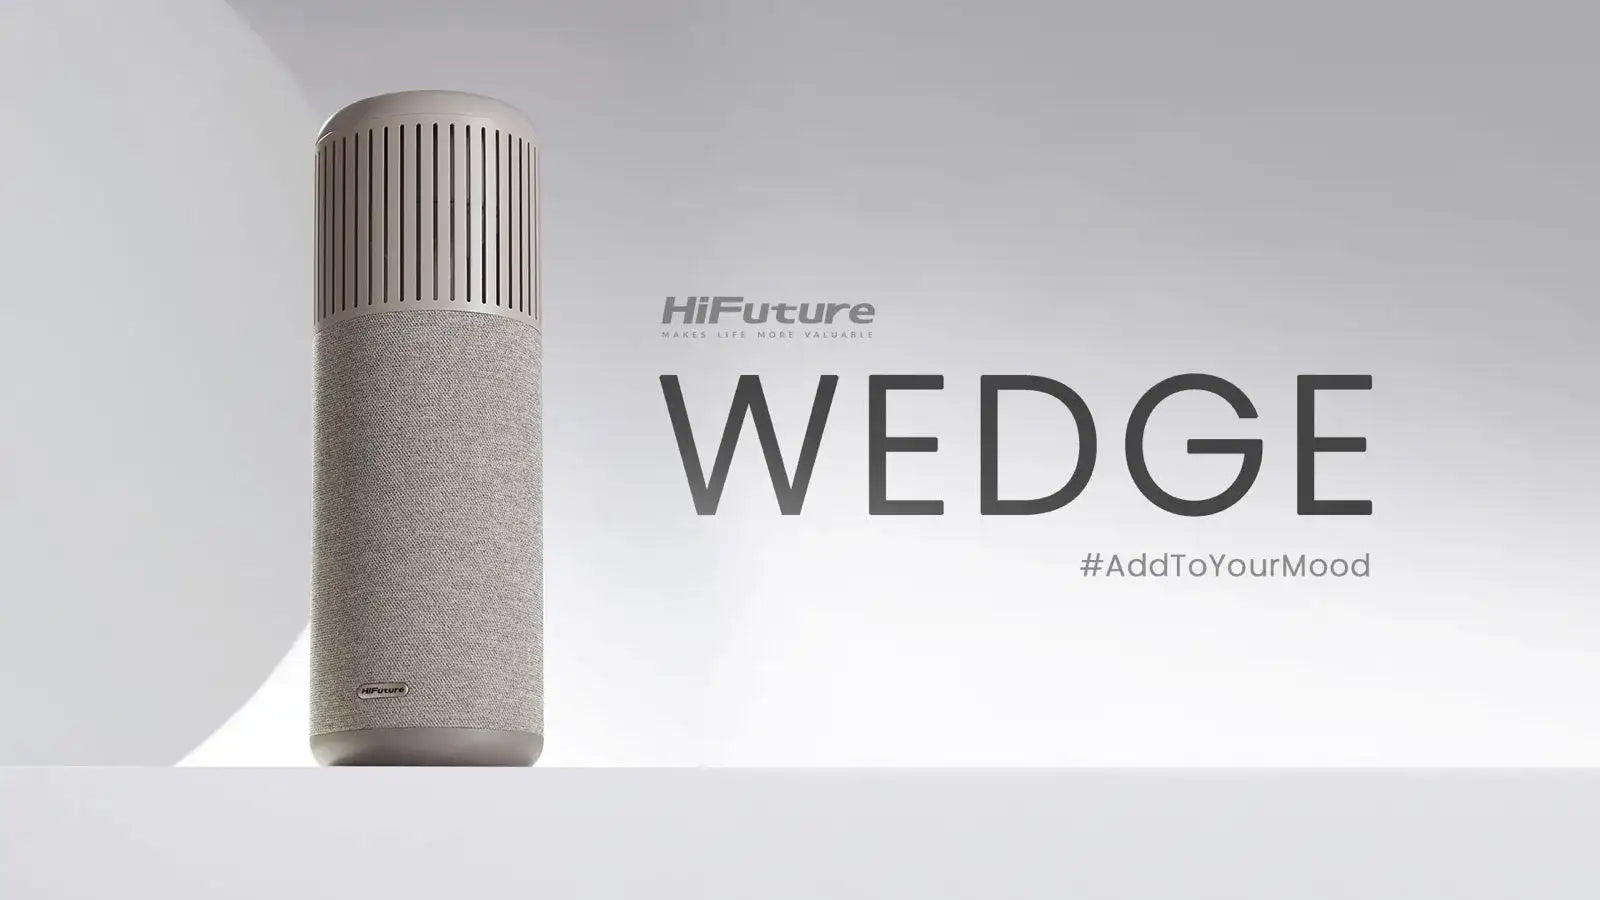 HiFuture's Wedge Speaker: A Fusion of Sound, Light, and Connectivity